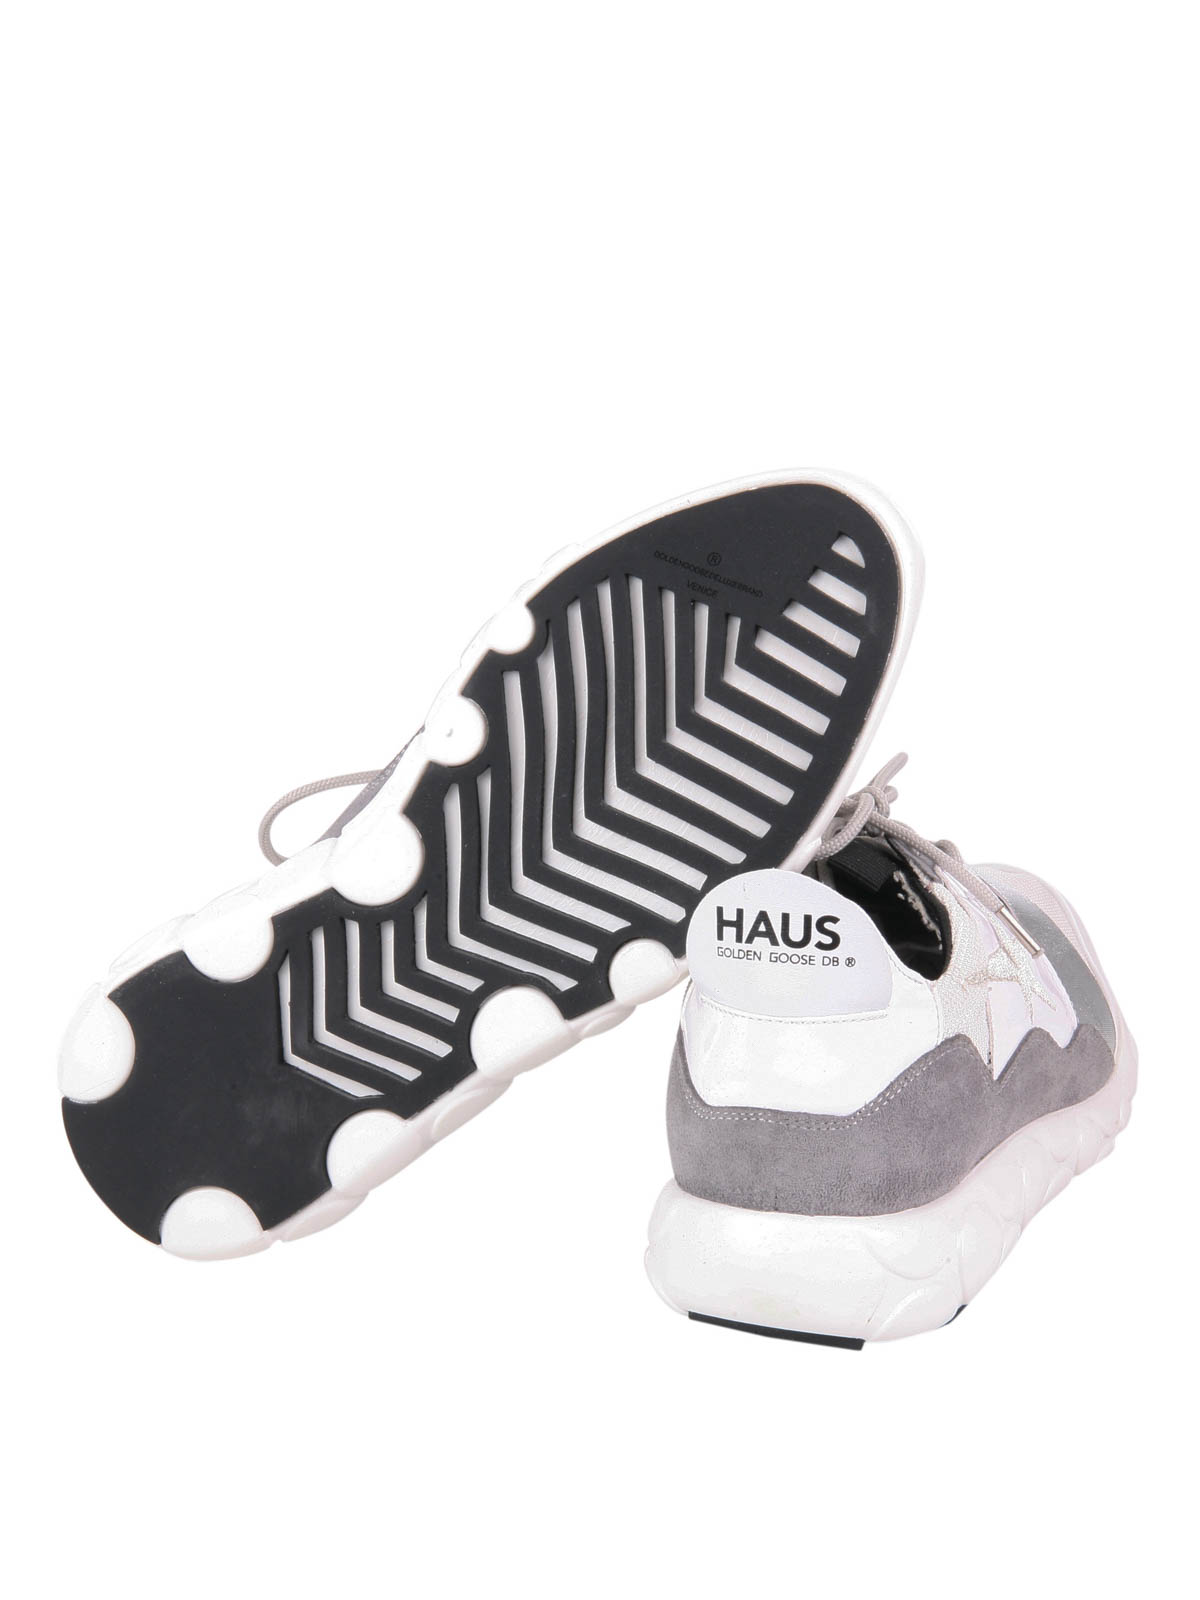 kål nærme sig Foresee Trainers Golden Goose - Haus mesh and leather sneakers - H29WS675B1